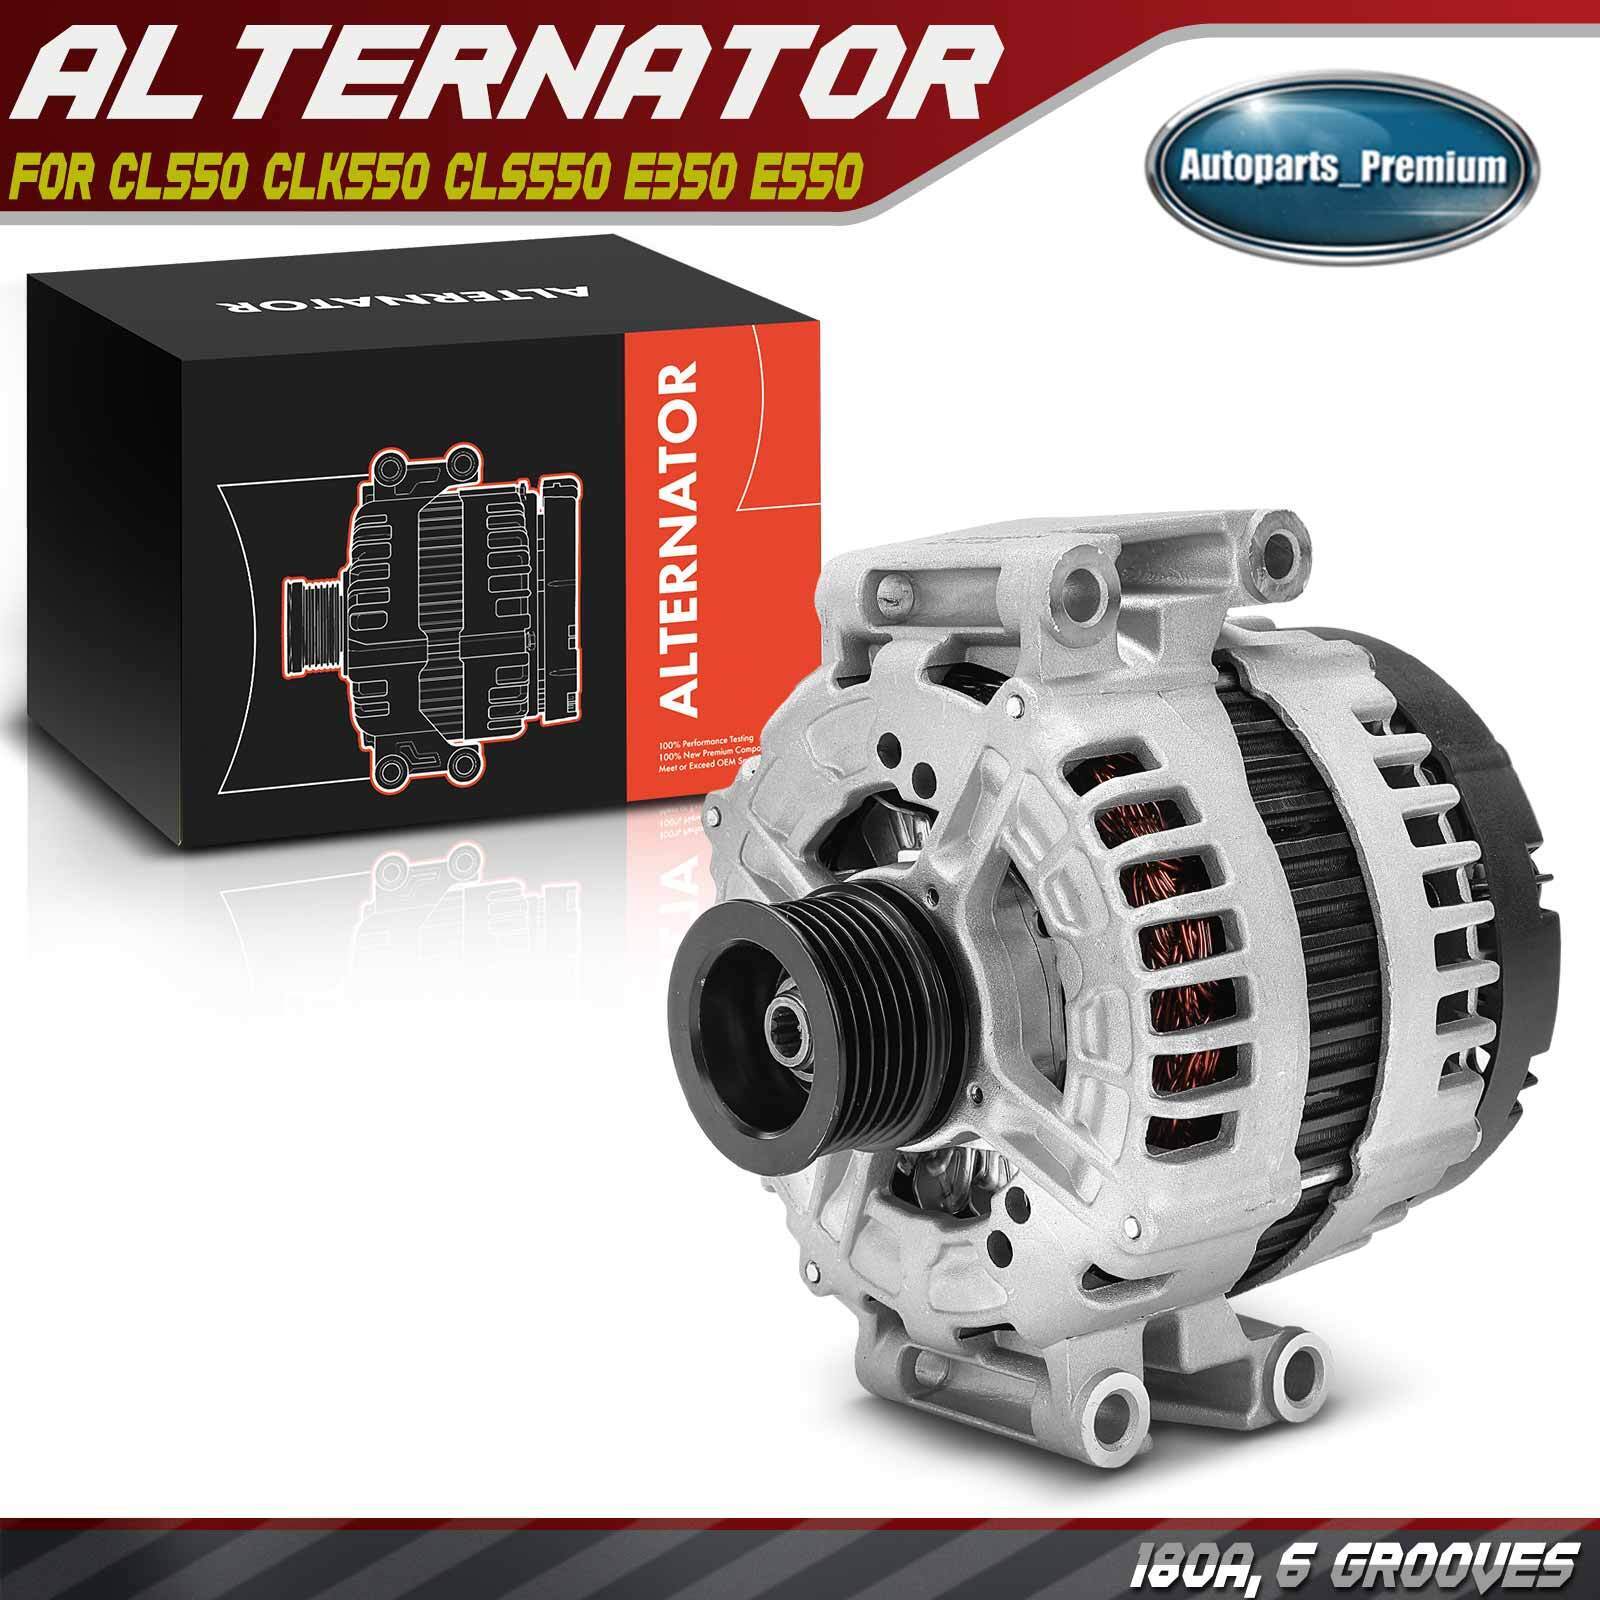 Alternator for CL550 CLK550 CLS550 E350 E550 G550  180A 12V CW 6-Groove Pulley